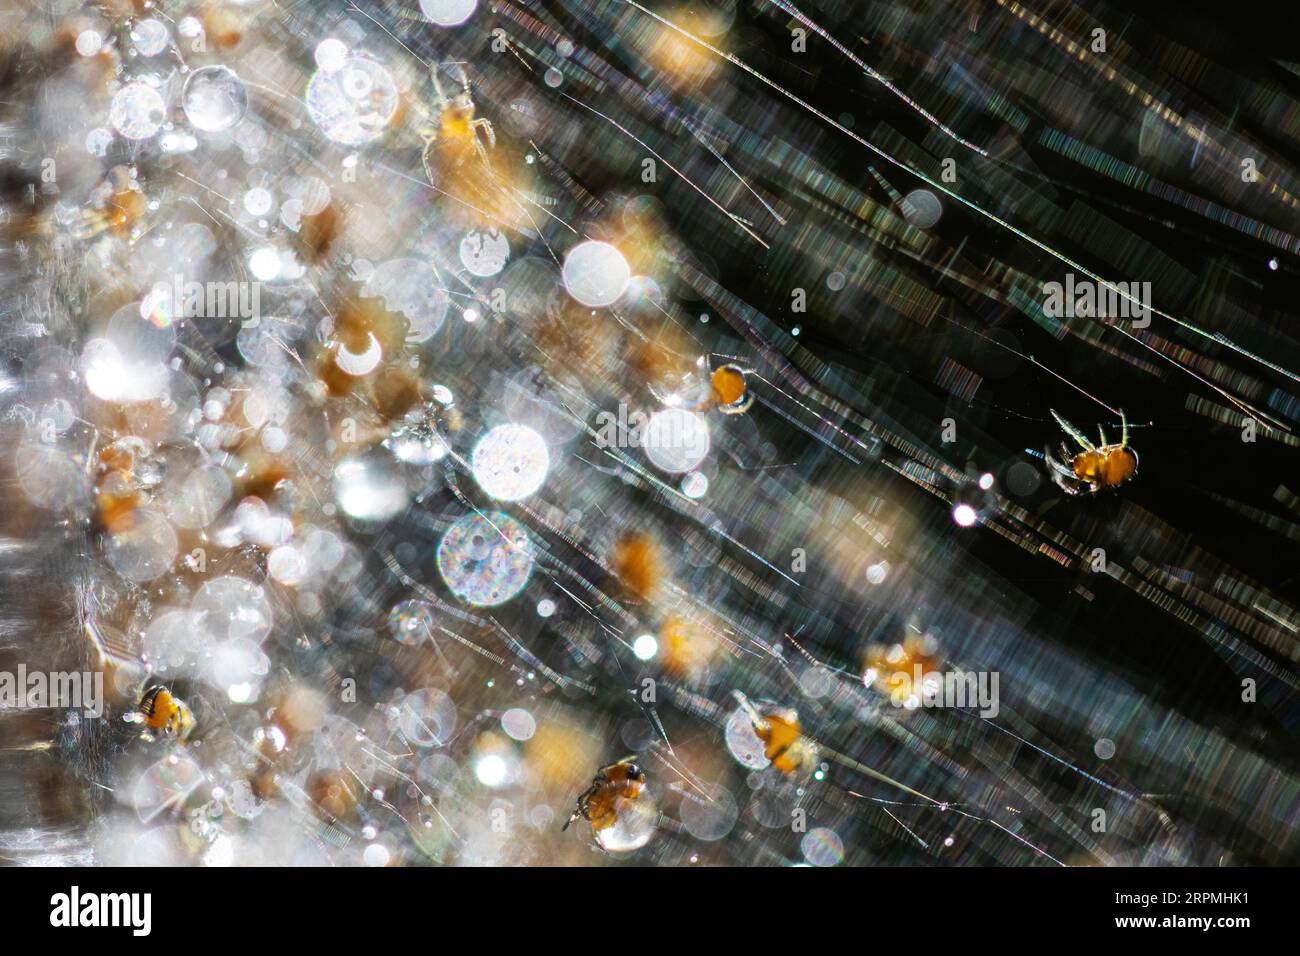 young spiders in web, light reflexions, Netherlands, Frisia Stock Photo